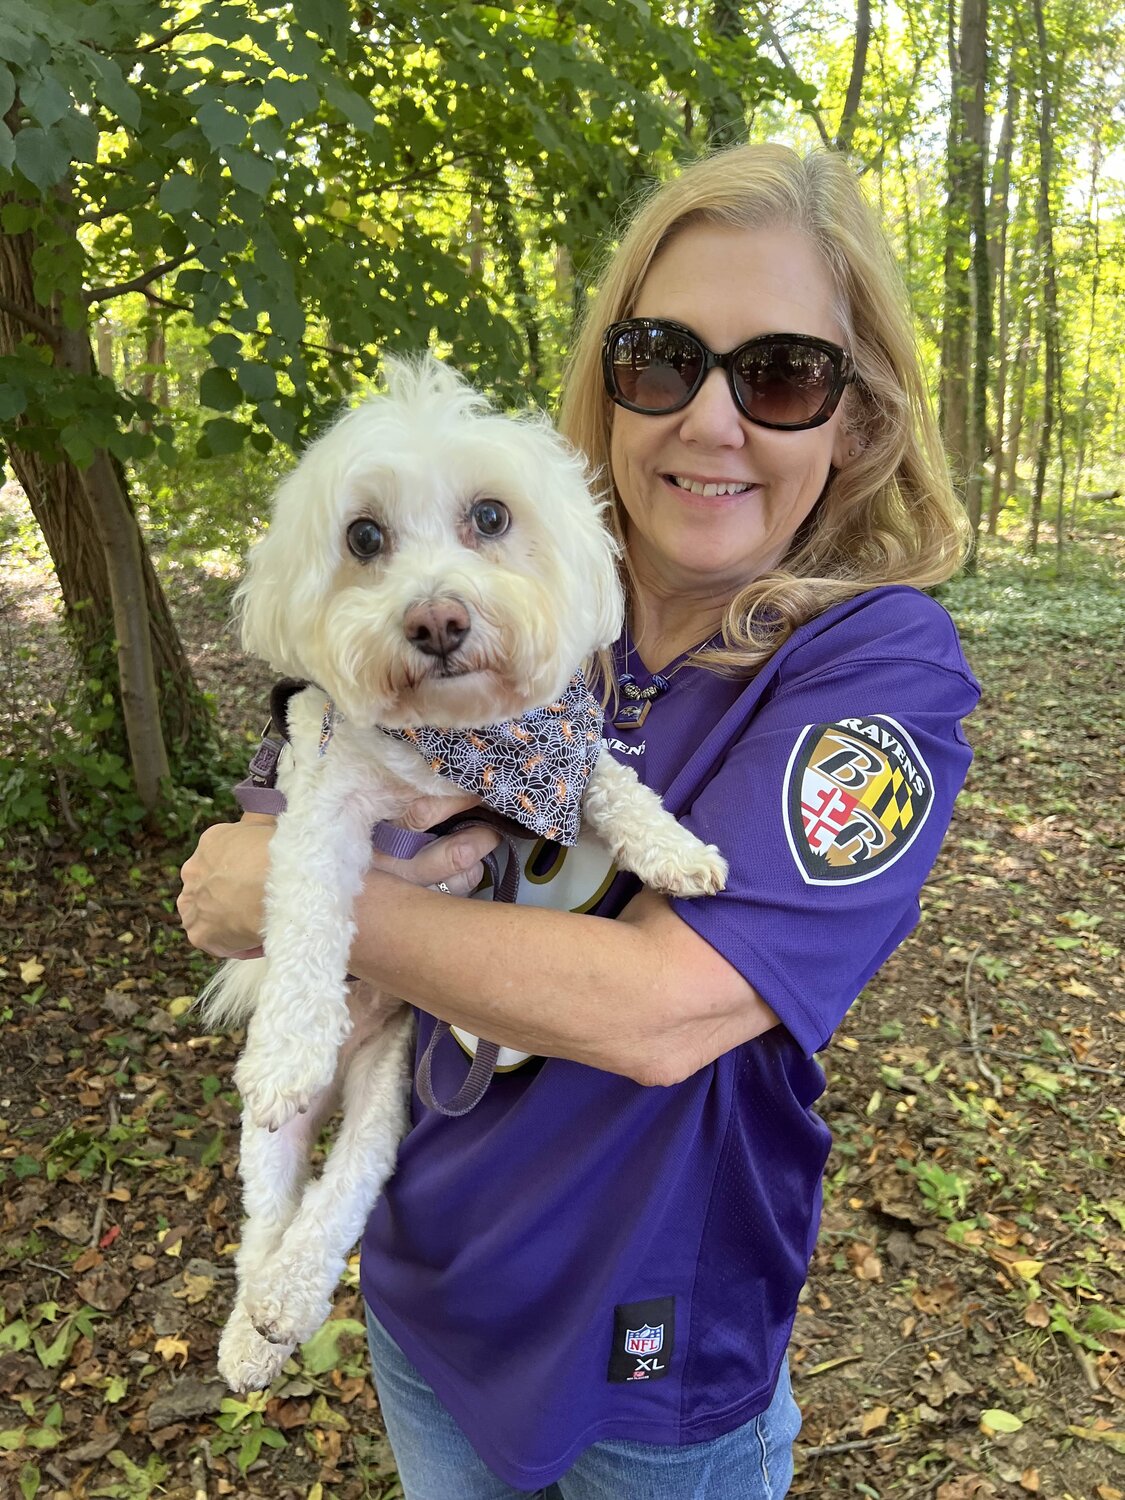 This Ravens fan and her puppy received the blessing and then hurried home to catch the end of the Ravens game, in which the hometown team defeated the Browns 28-3.